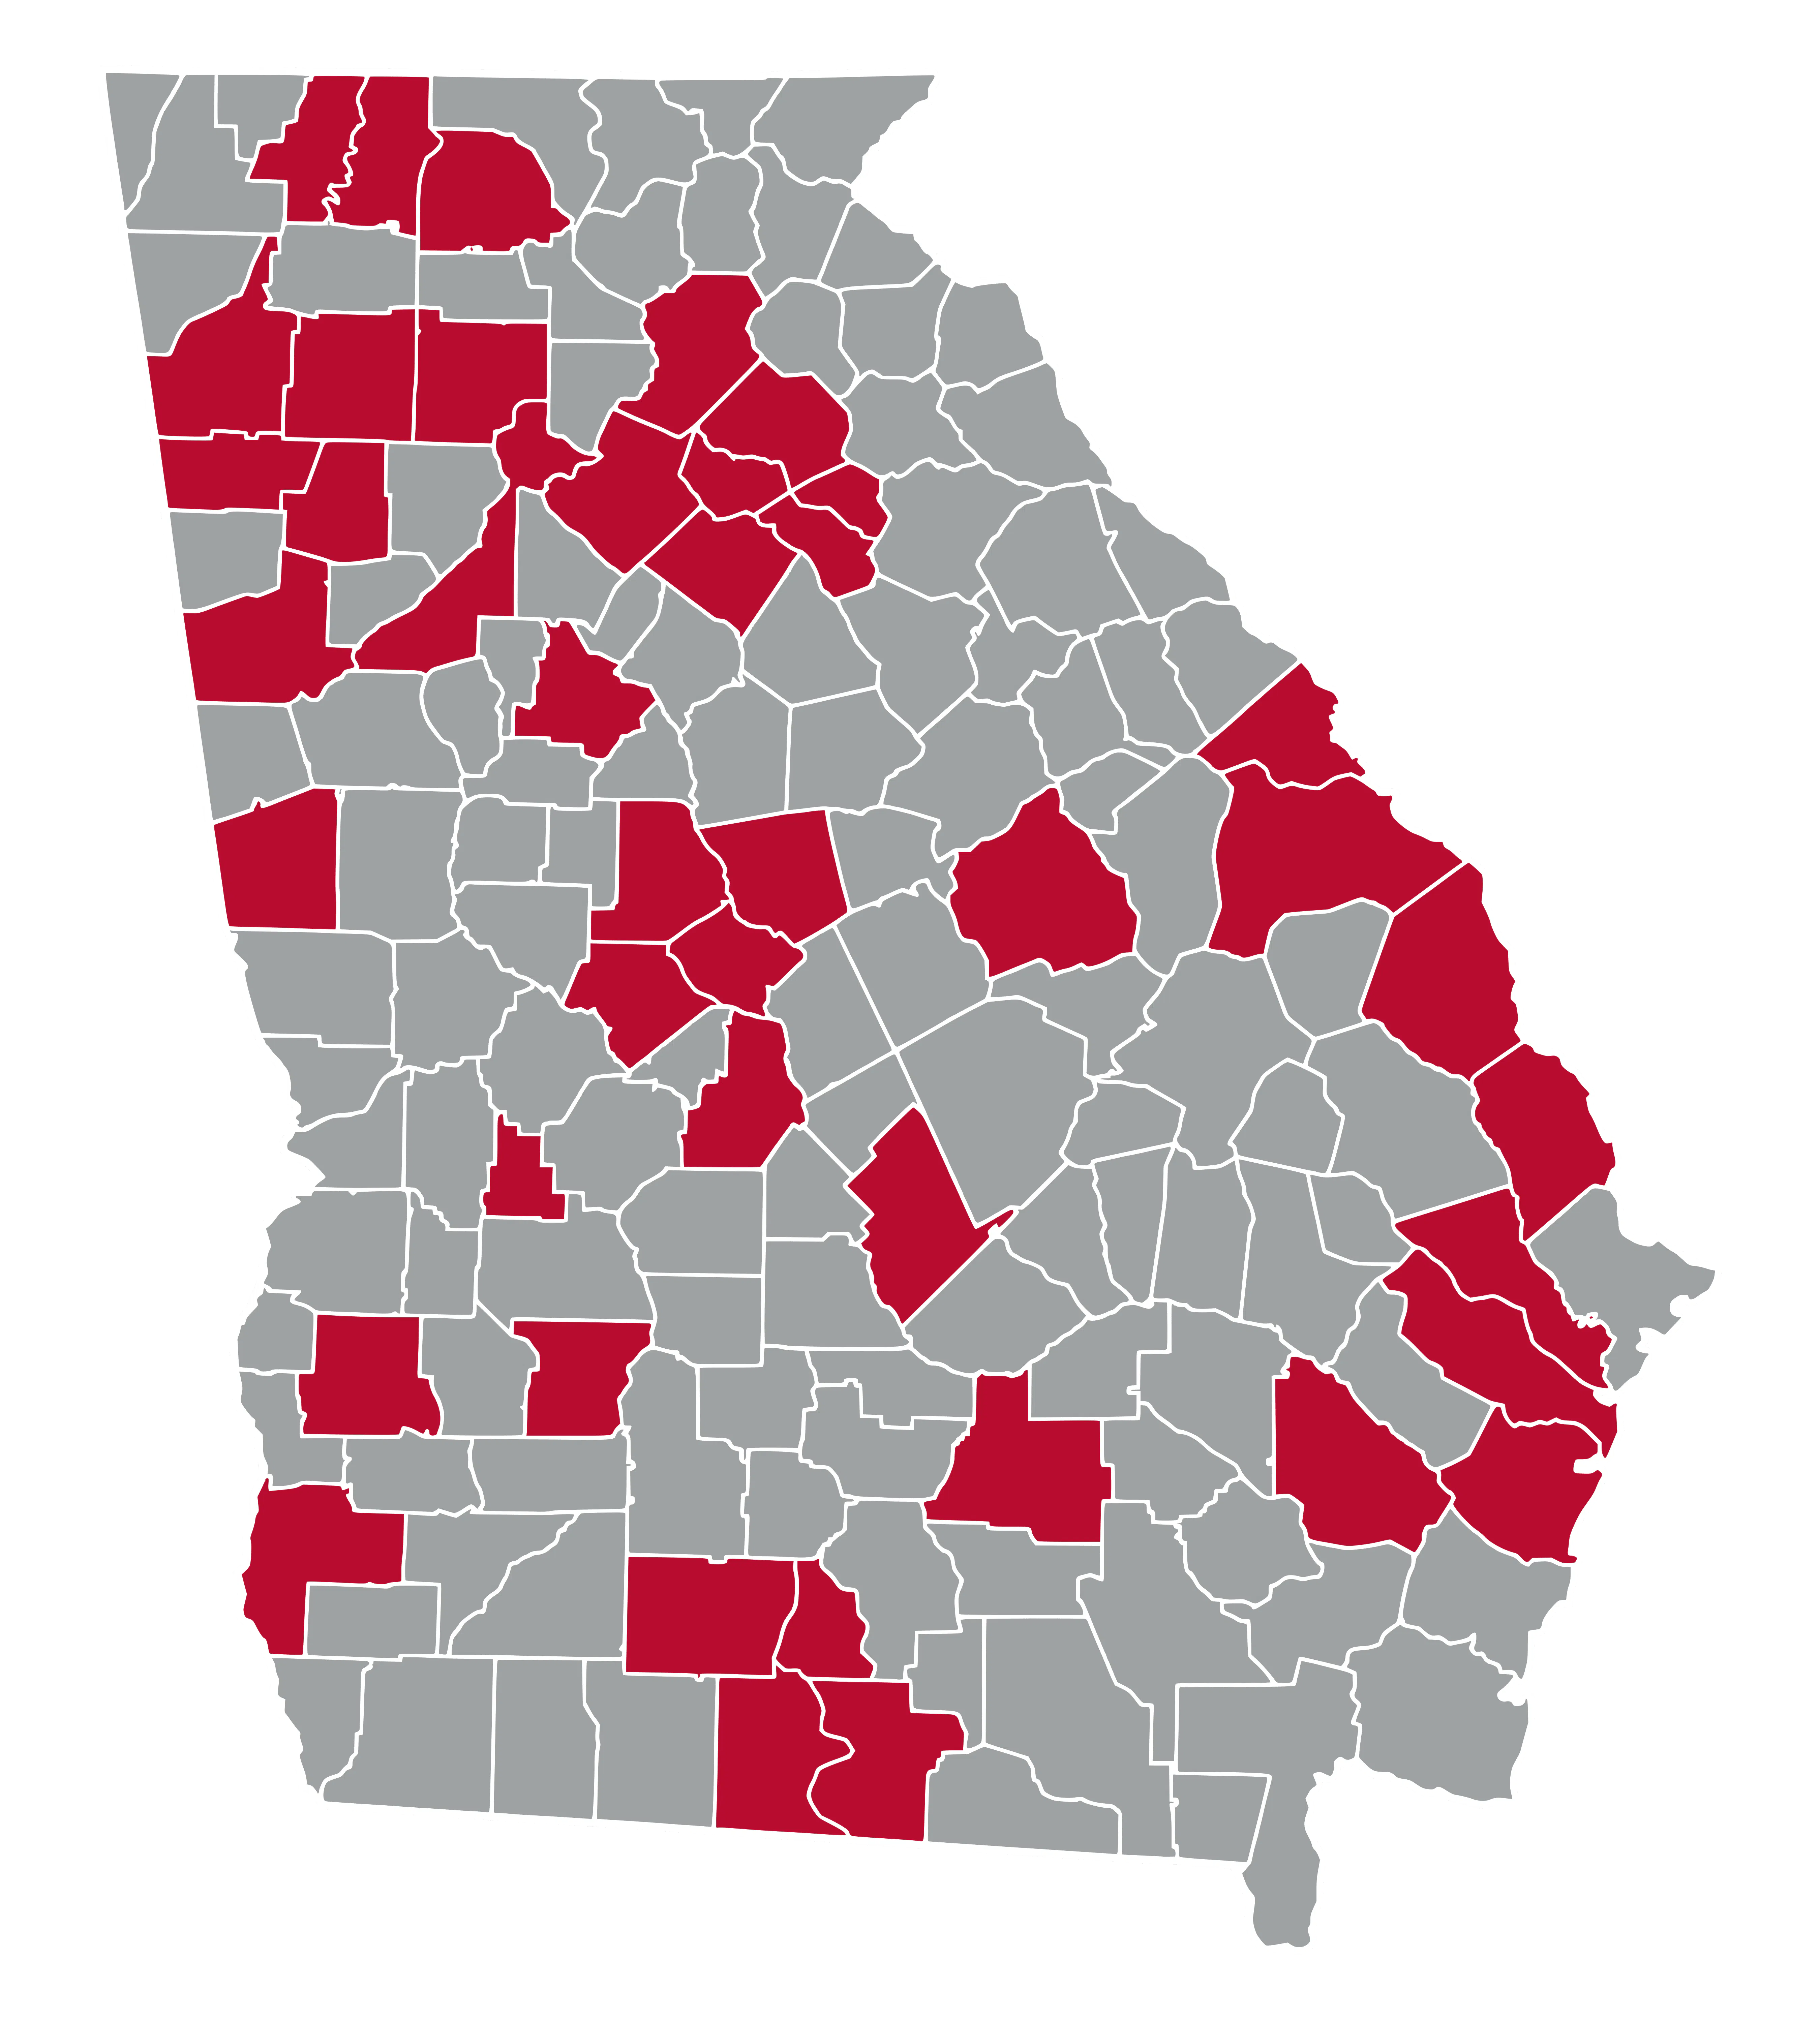 Visual map of counties in the following list